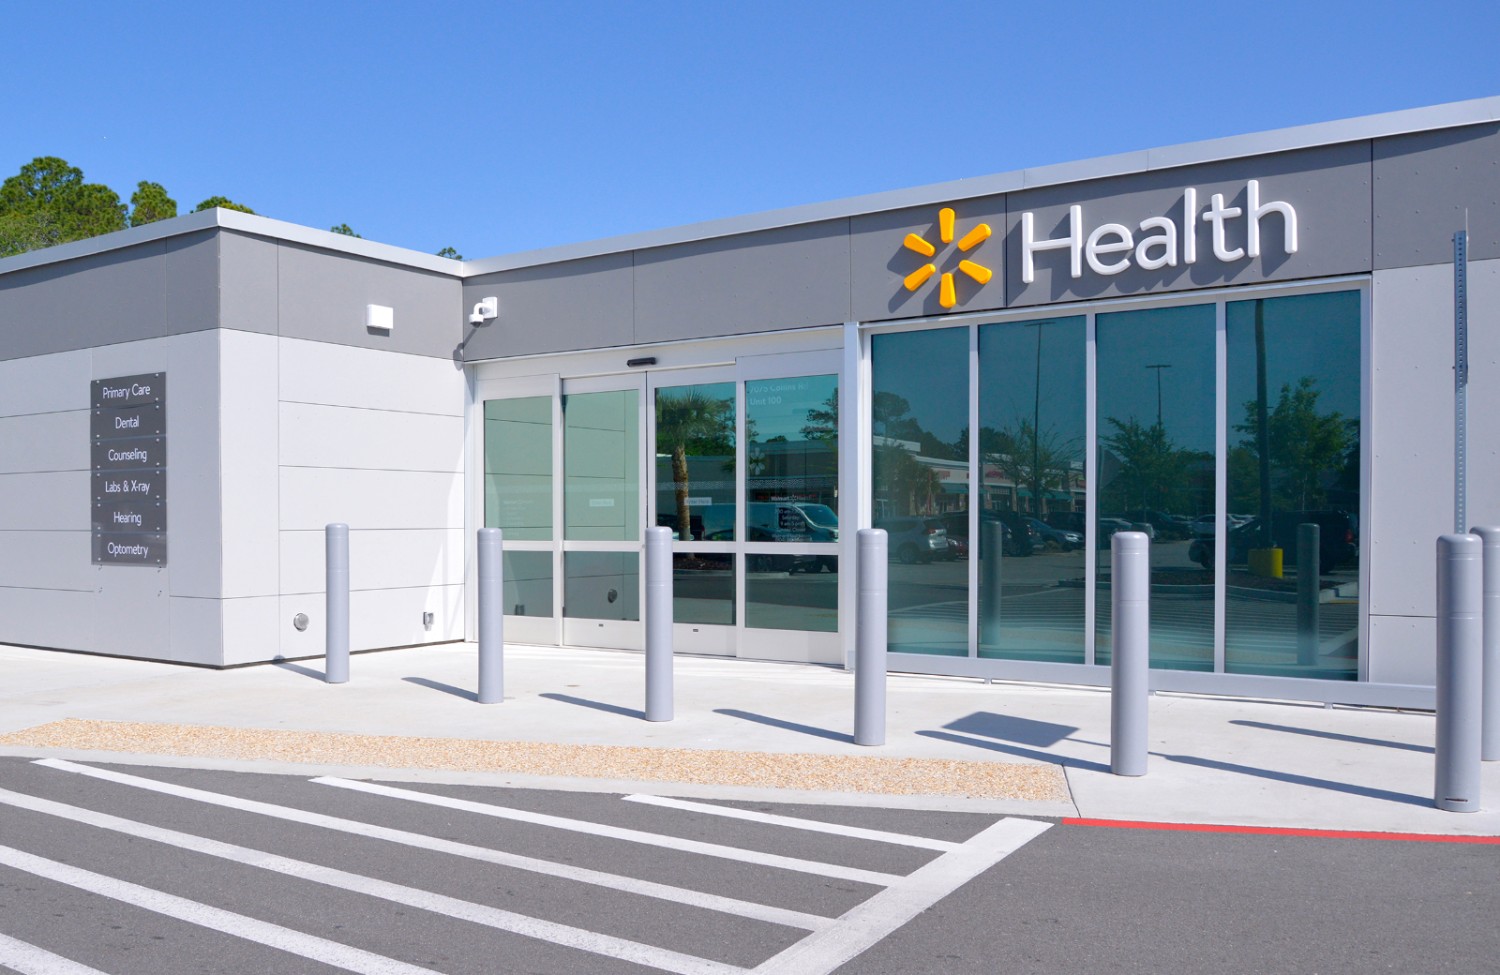 Walmart Health Expands to Florida With Five New Health Centers